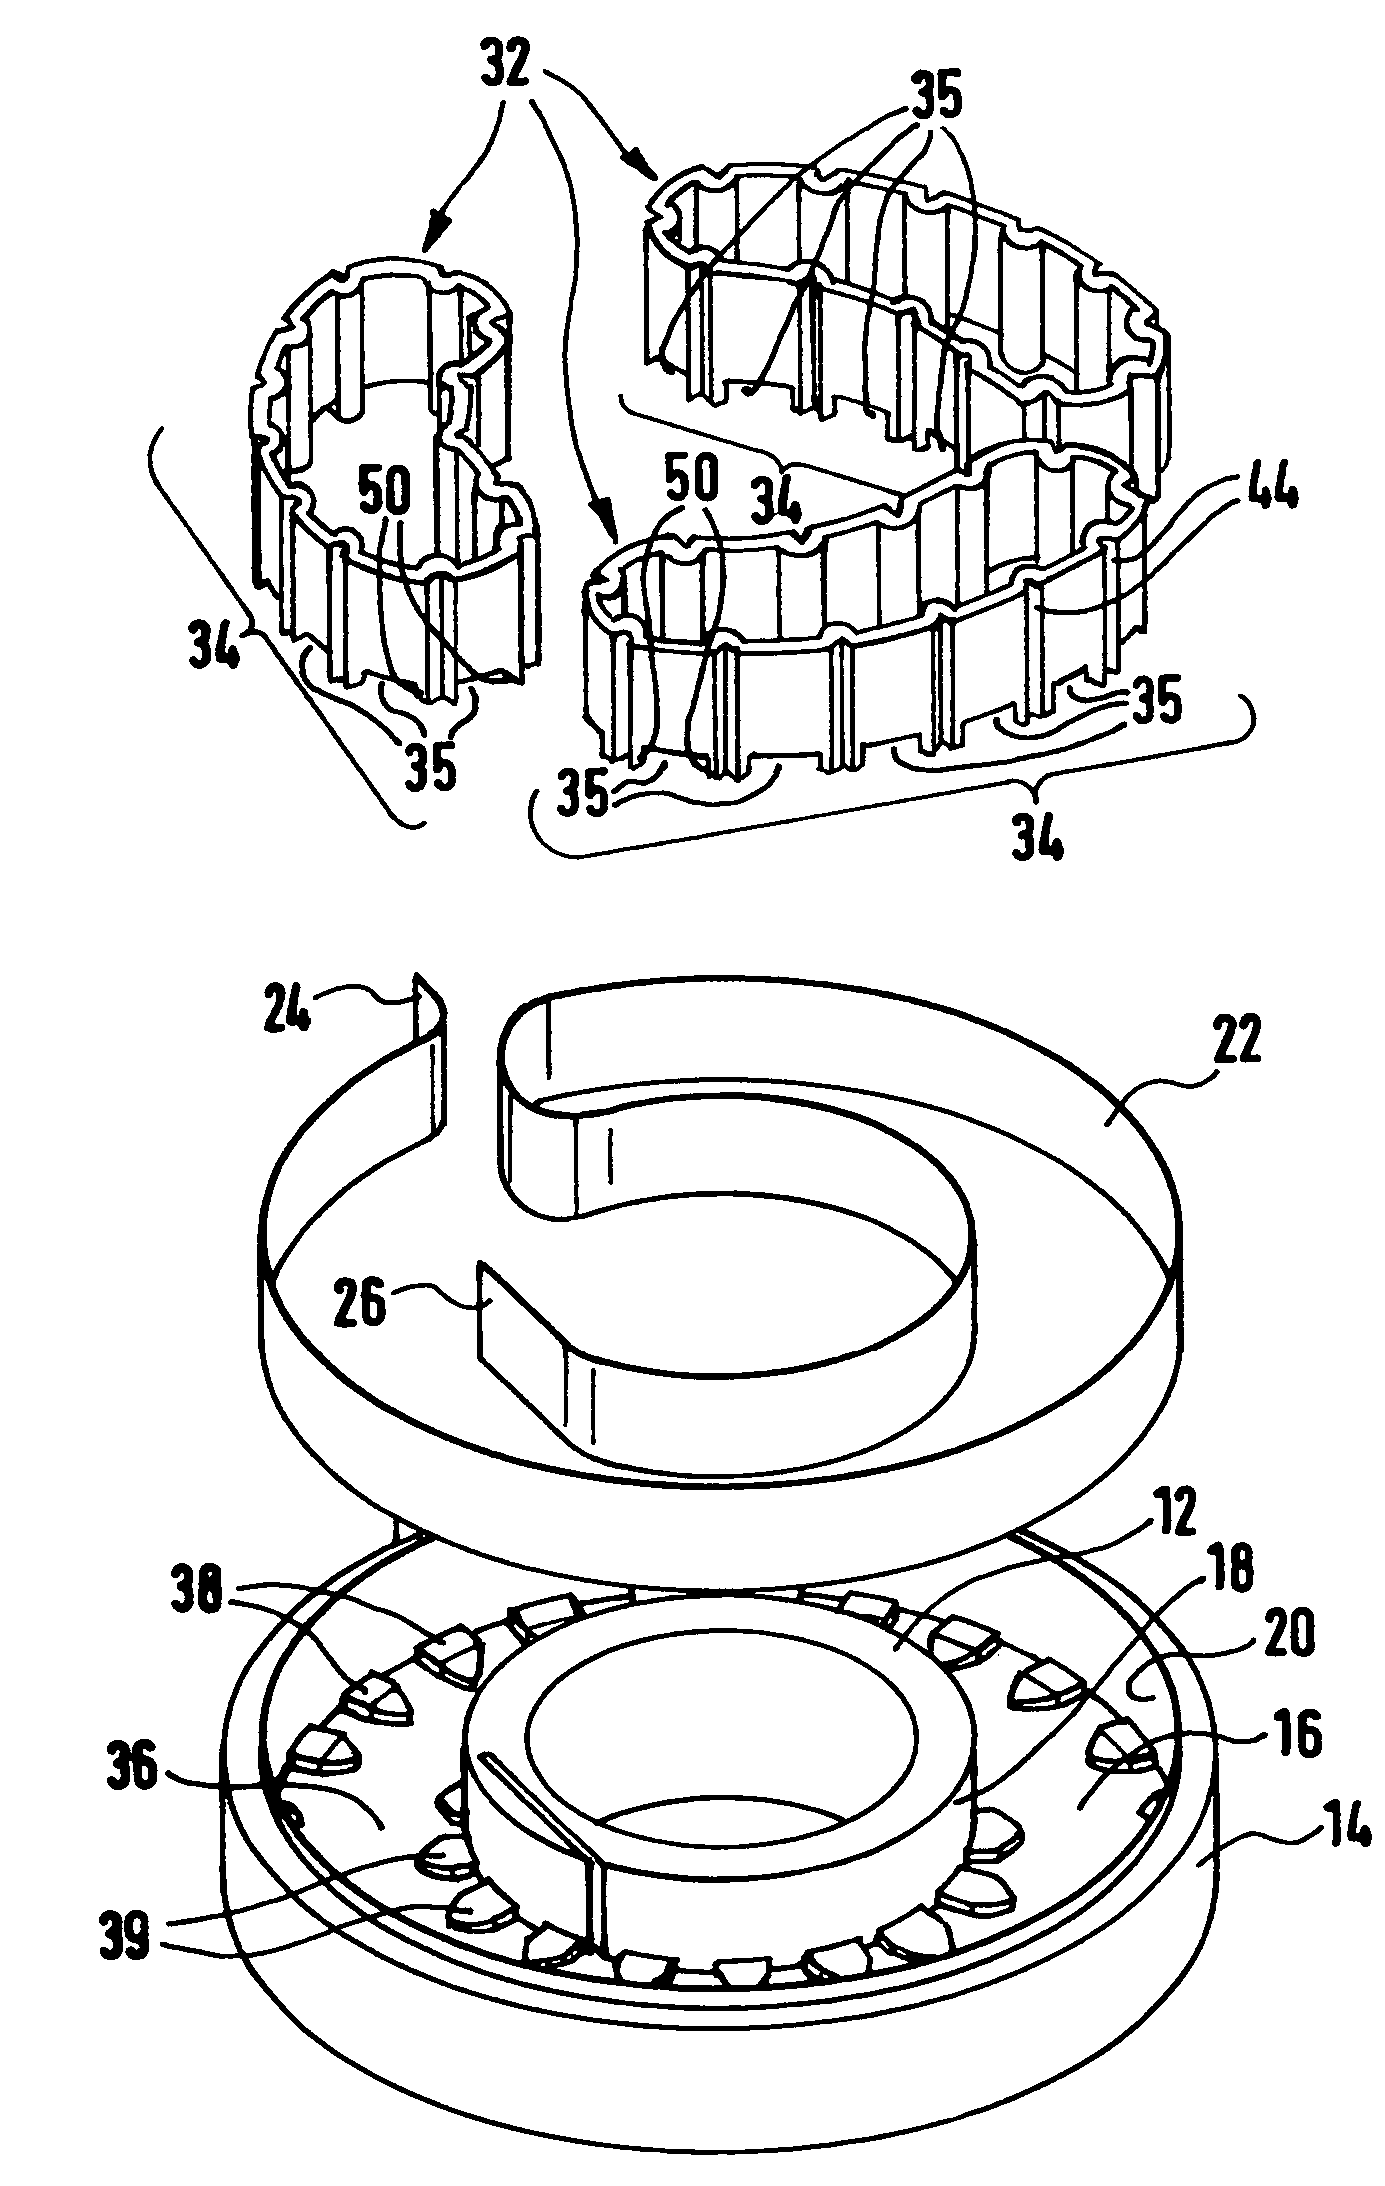 Transmission device for transmitting electrical signals between a rotor and a stator